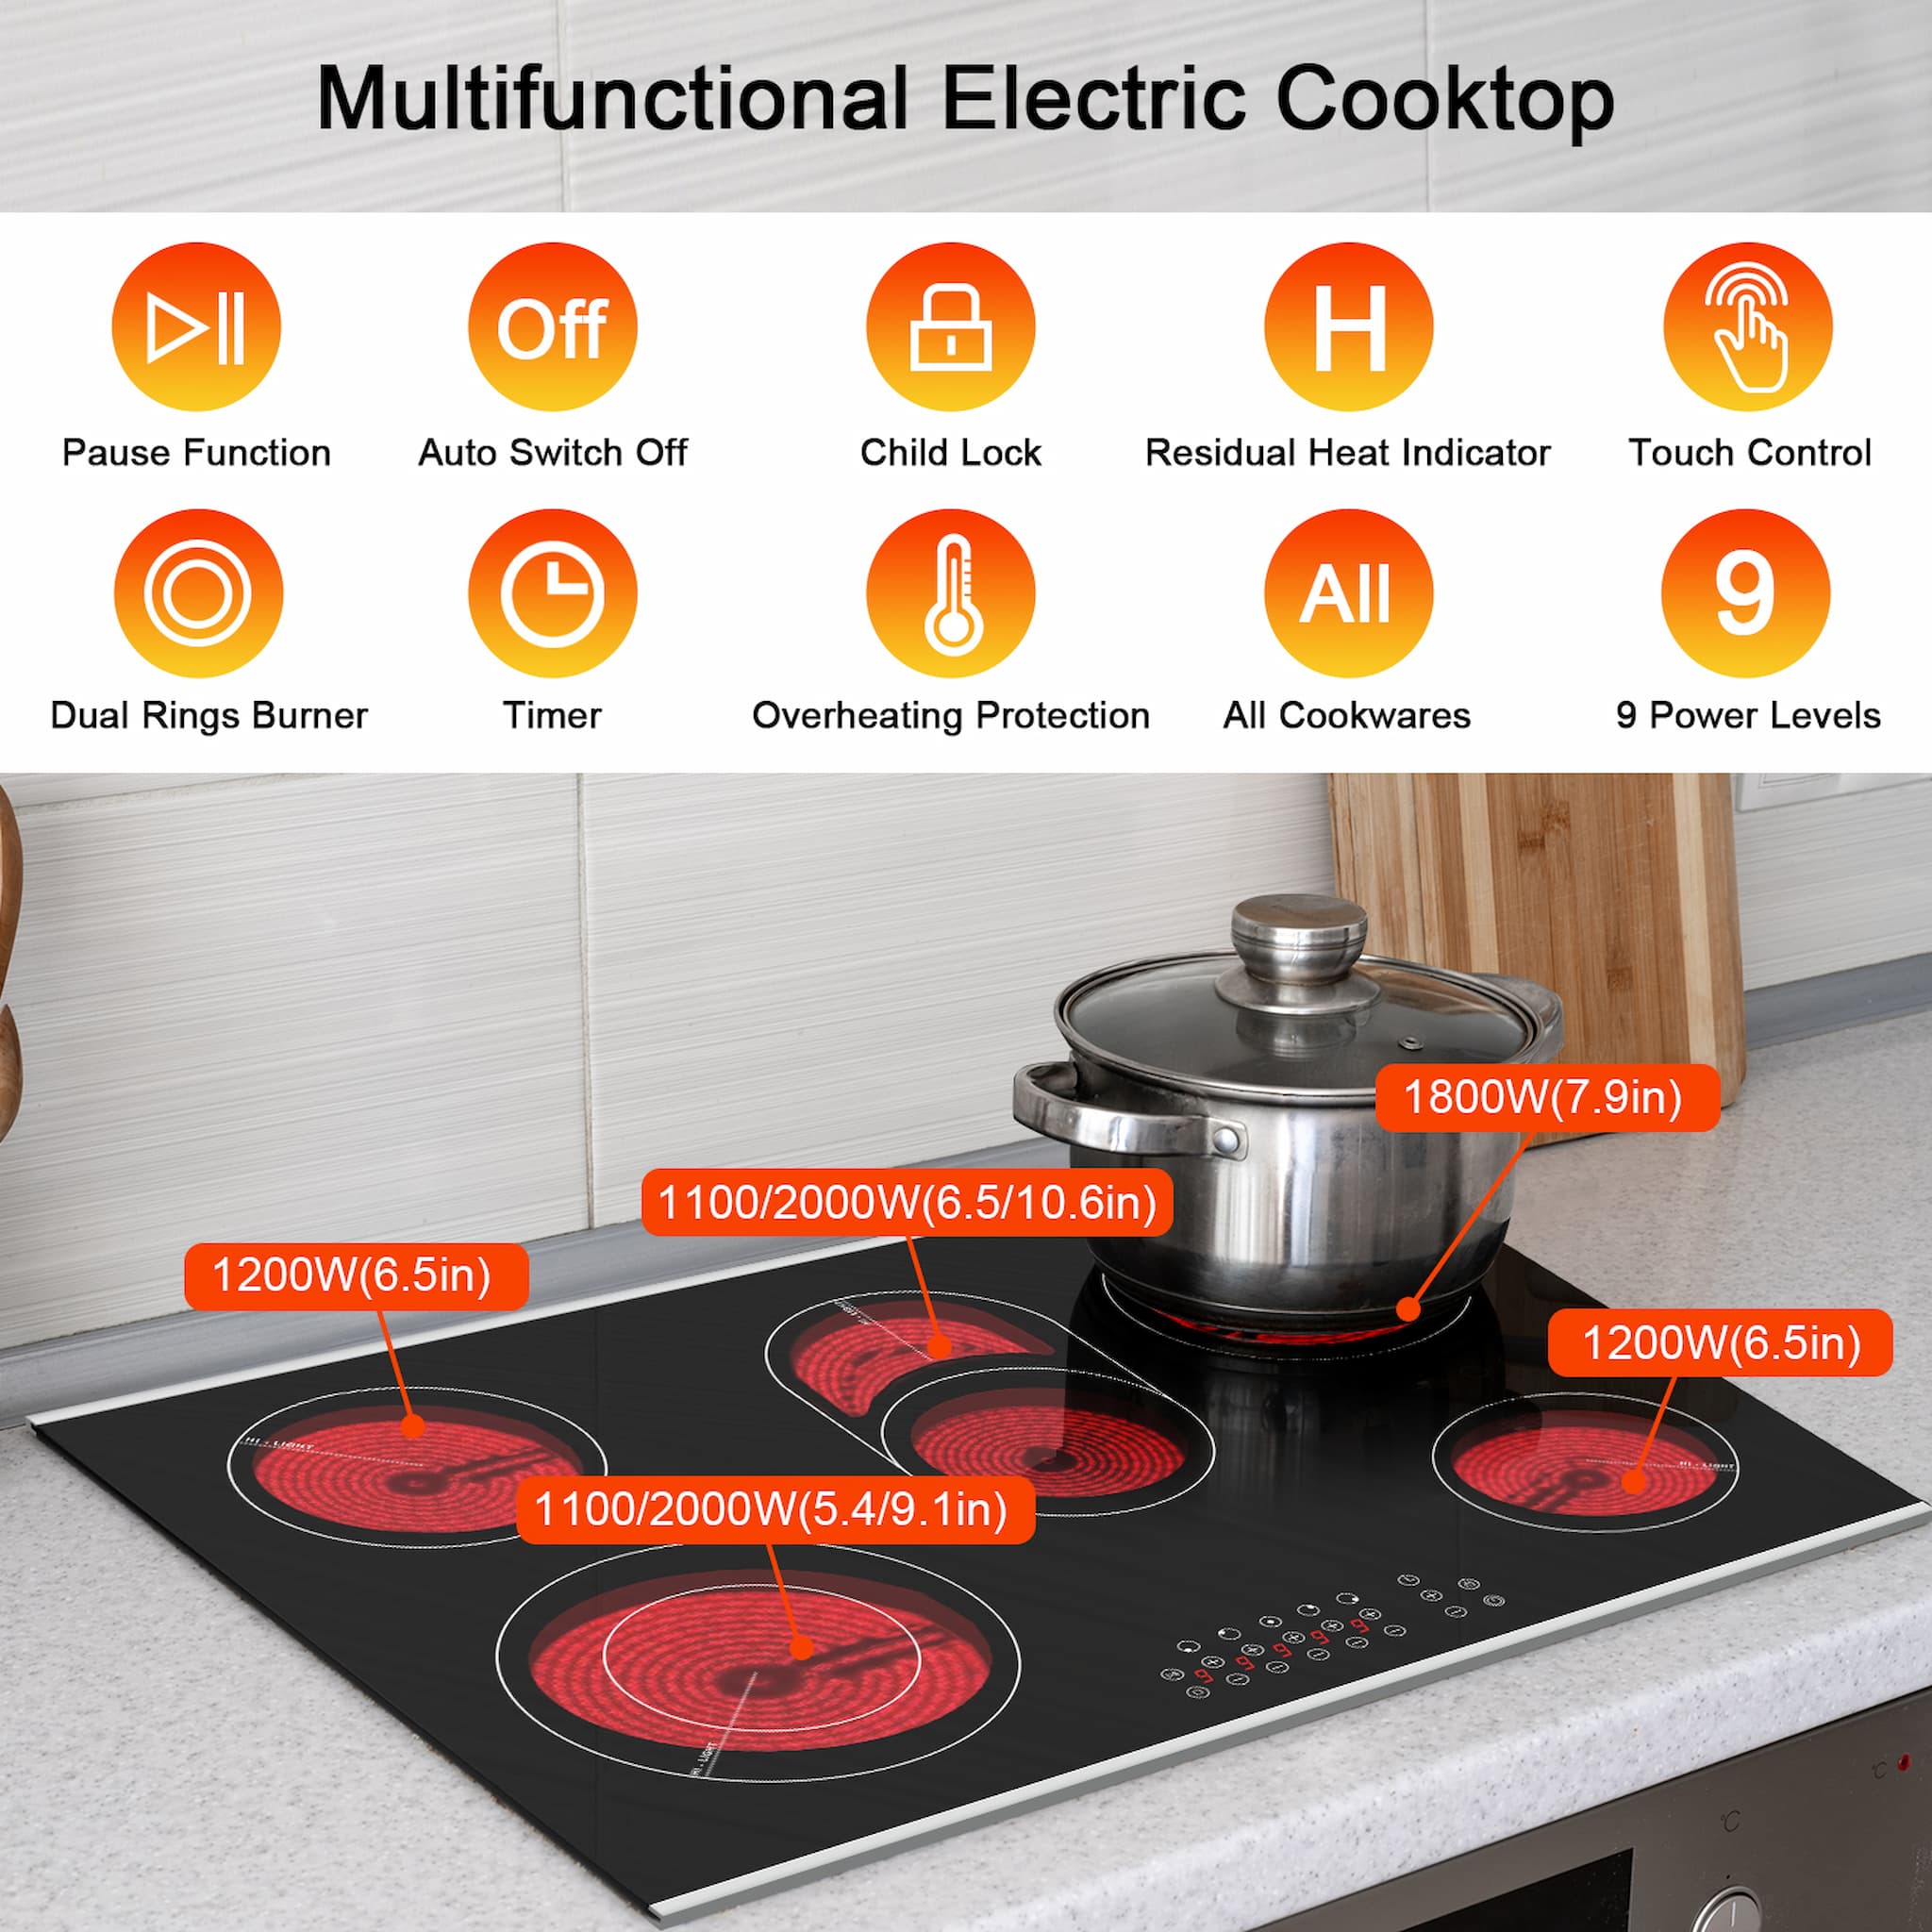 8400W high-power Built-in design electric ceramic stove, suitable for all cookware!